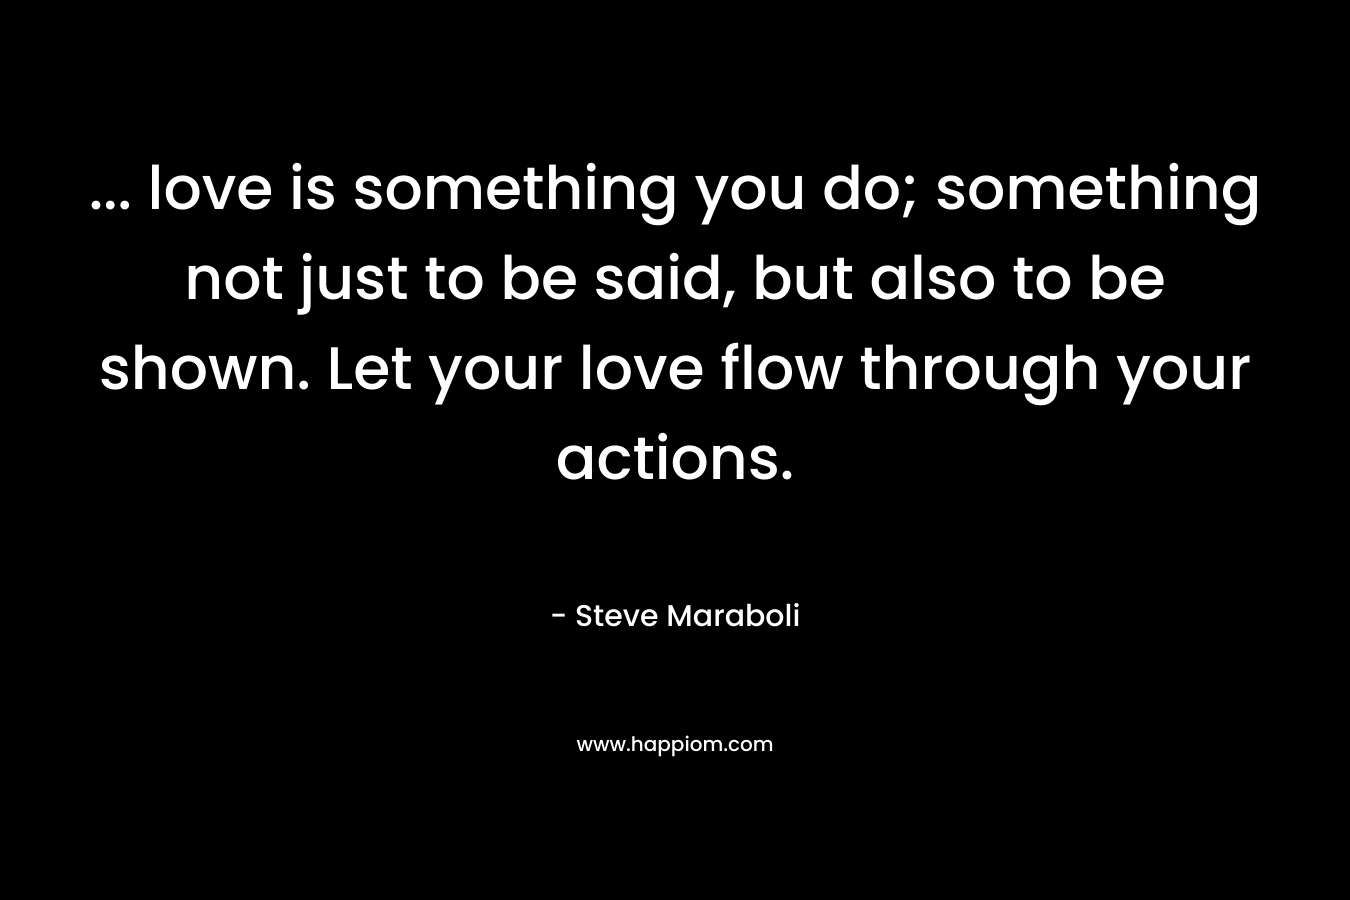 … love is something you do; something not just to be said, but also to be shown. Let your love flow through your actions. – Steve Maraboli